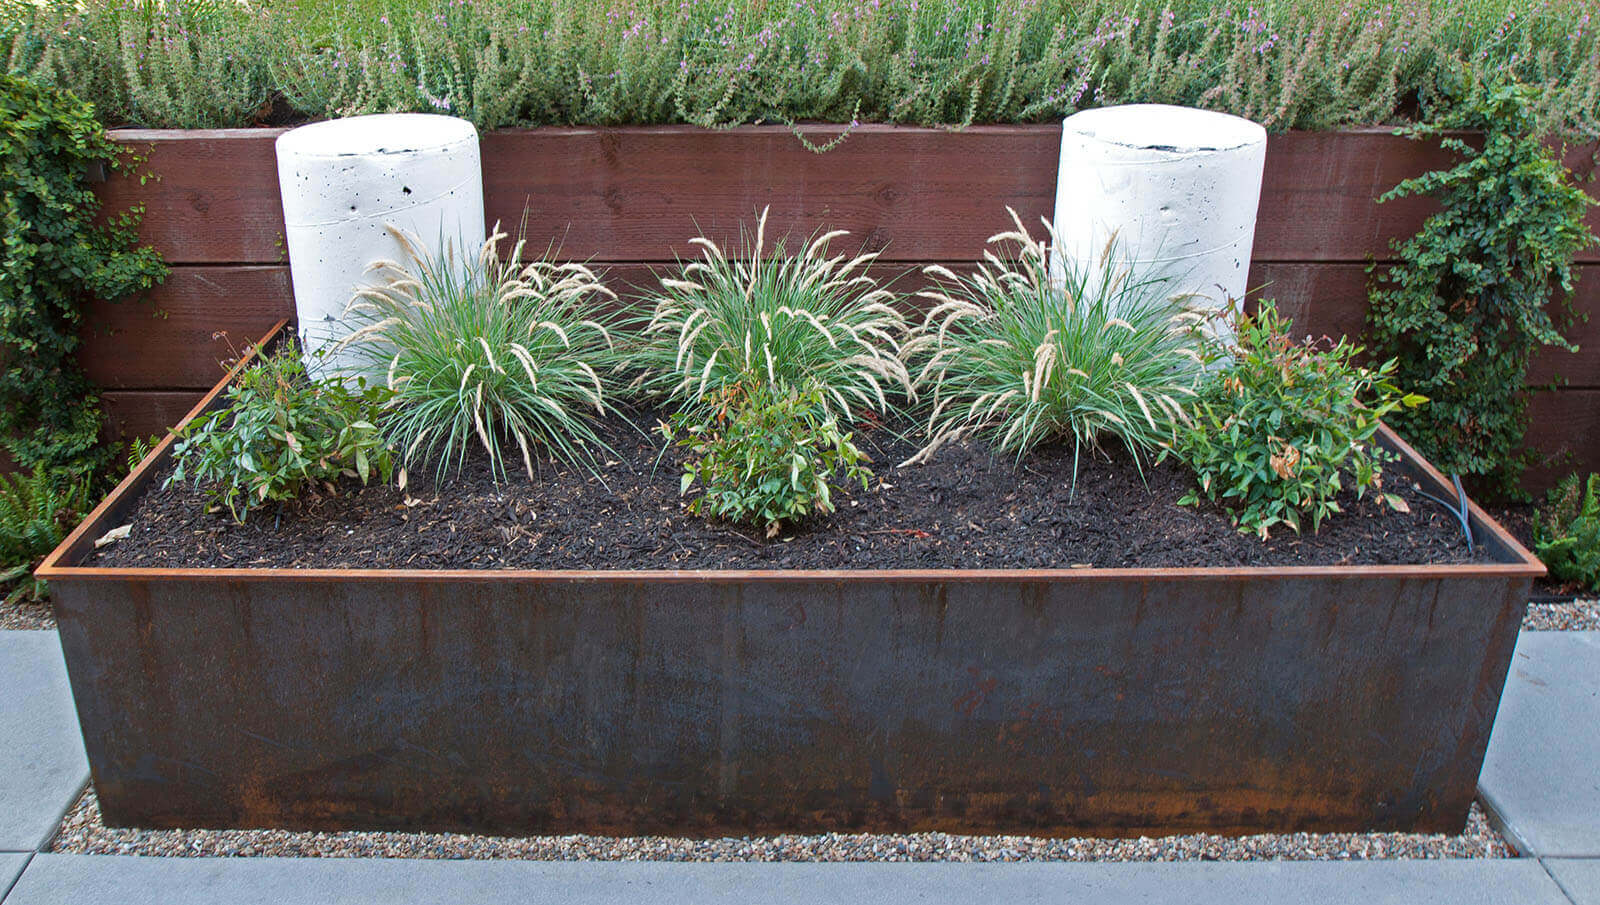 ornamental grasses and shrubs in a rustic metal raised bed with white concrete pillars and raised garden behin